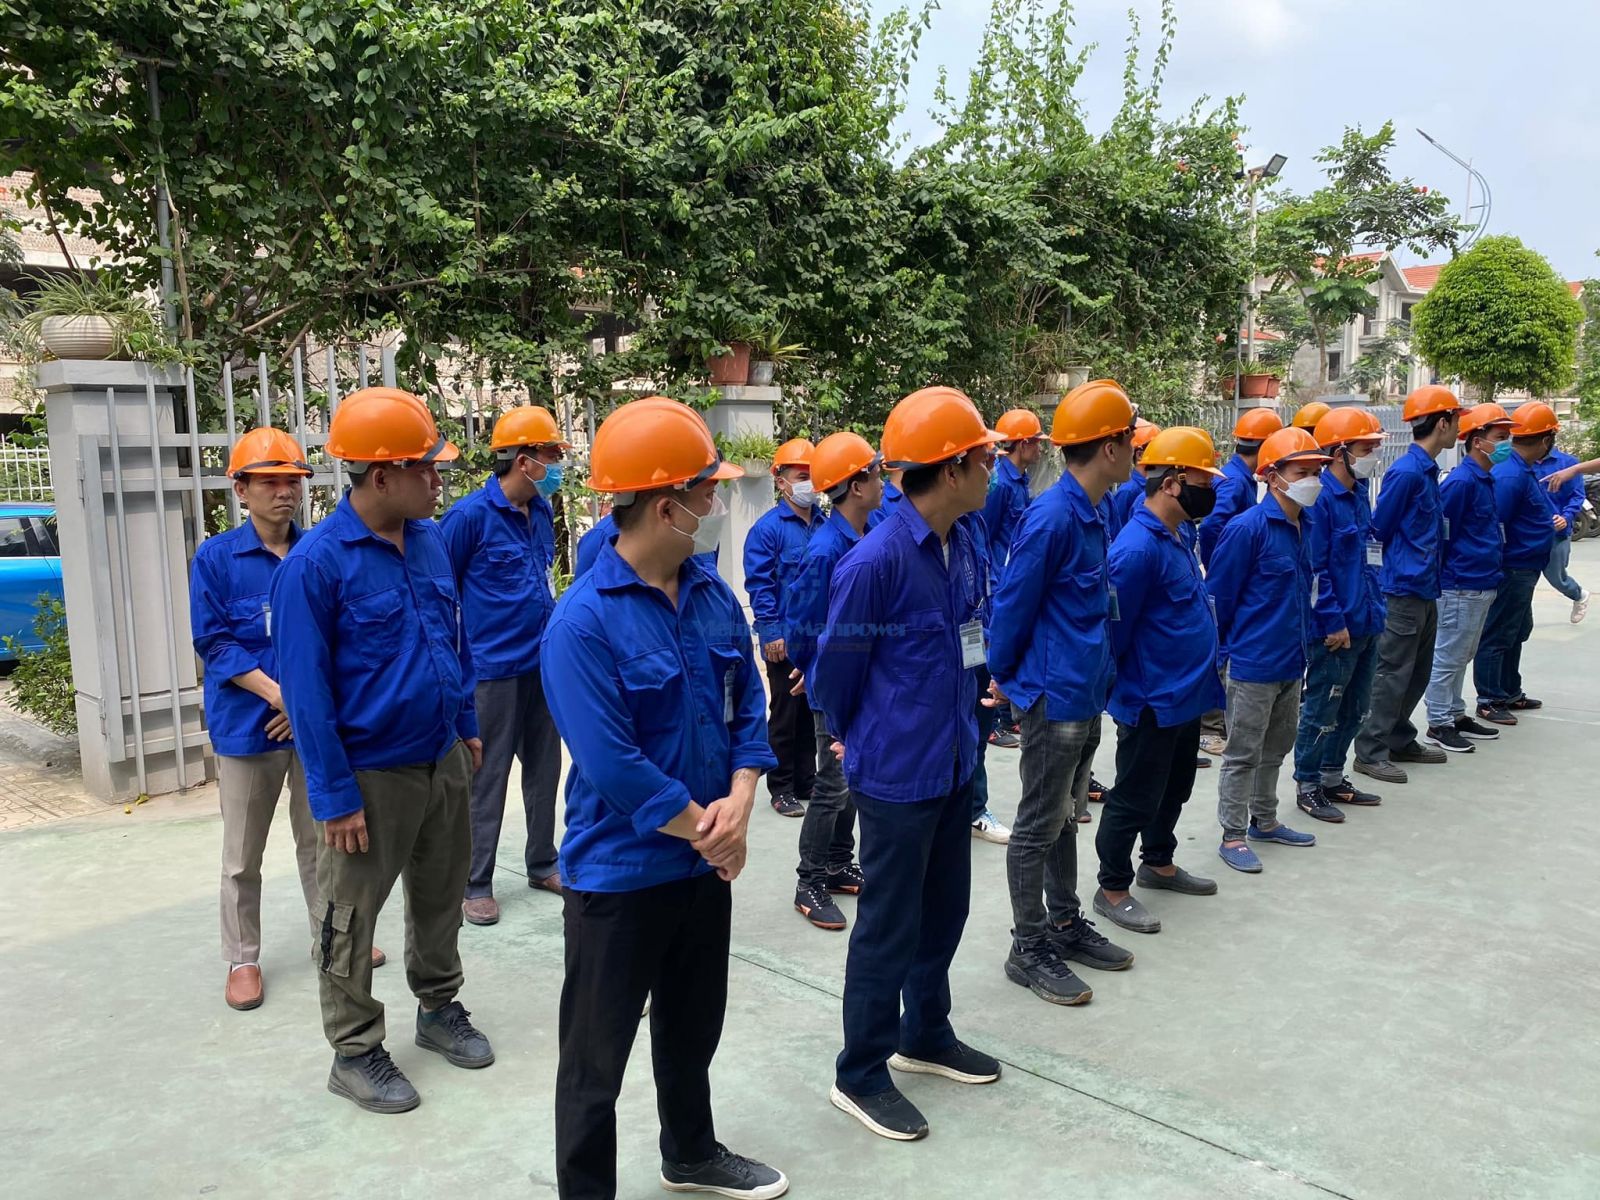 Vietnam Manpower provides assembly workers for car factory in Romania